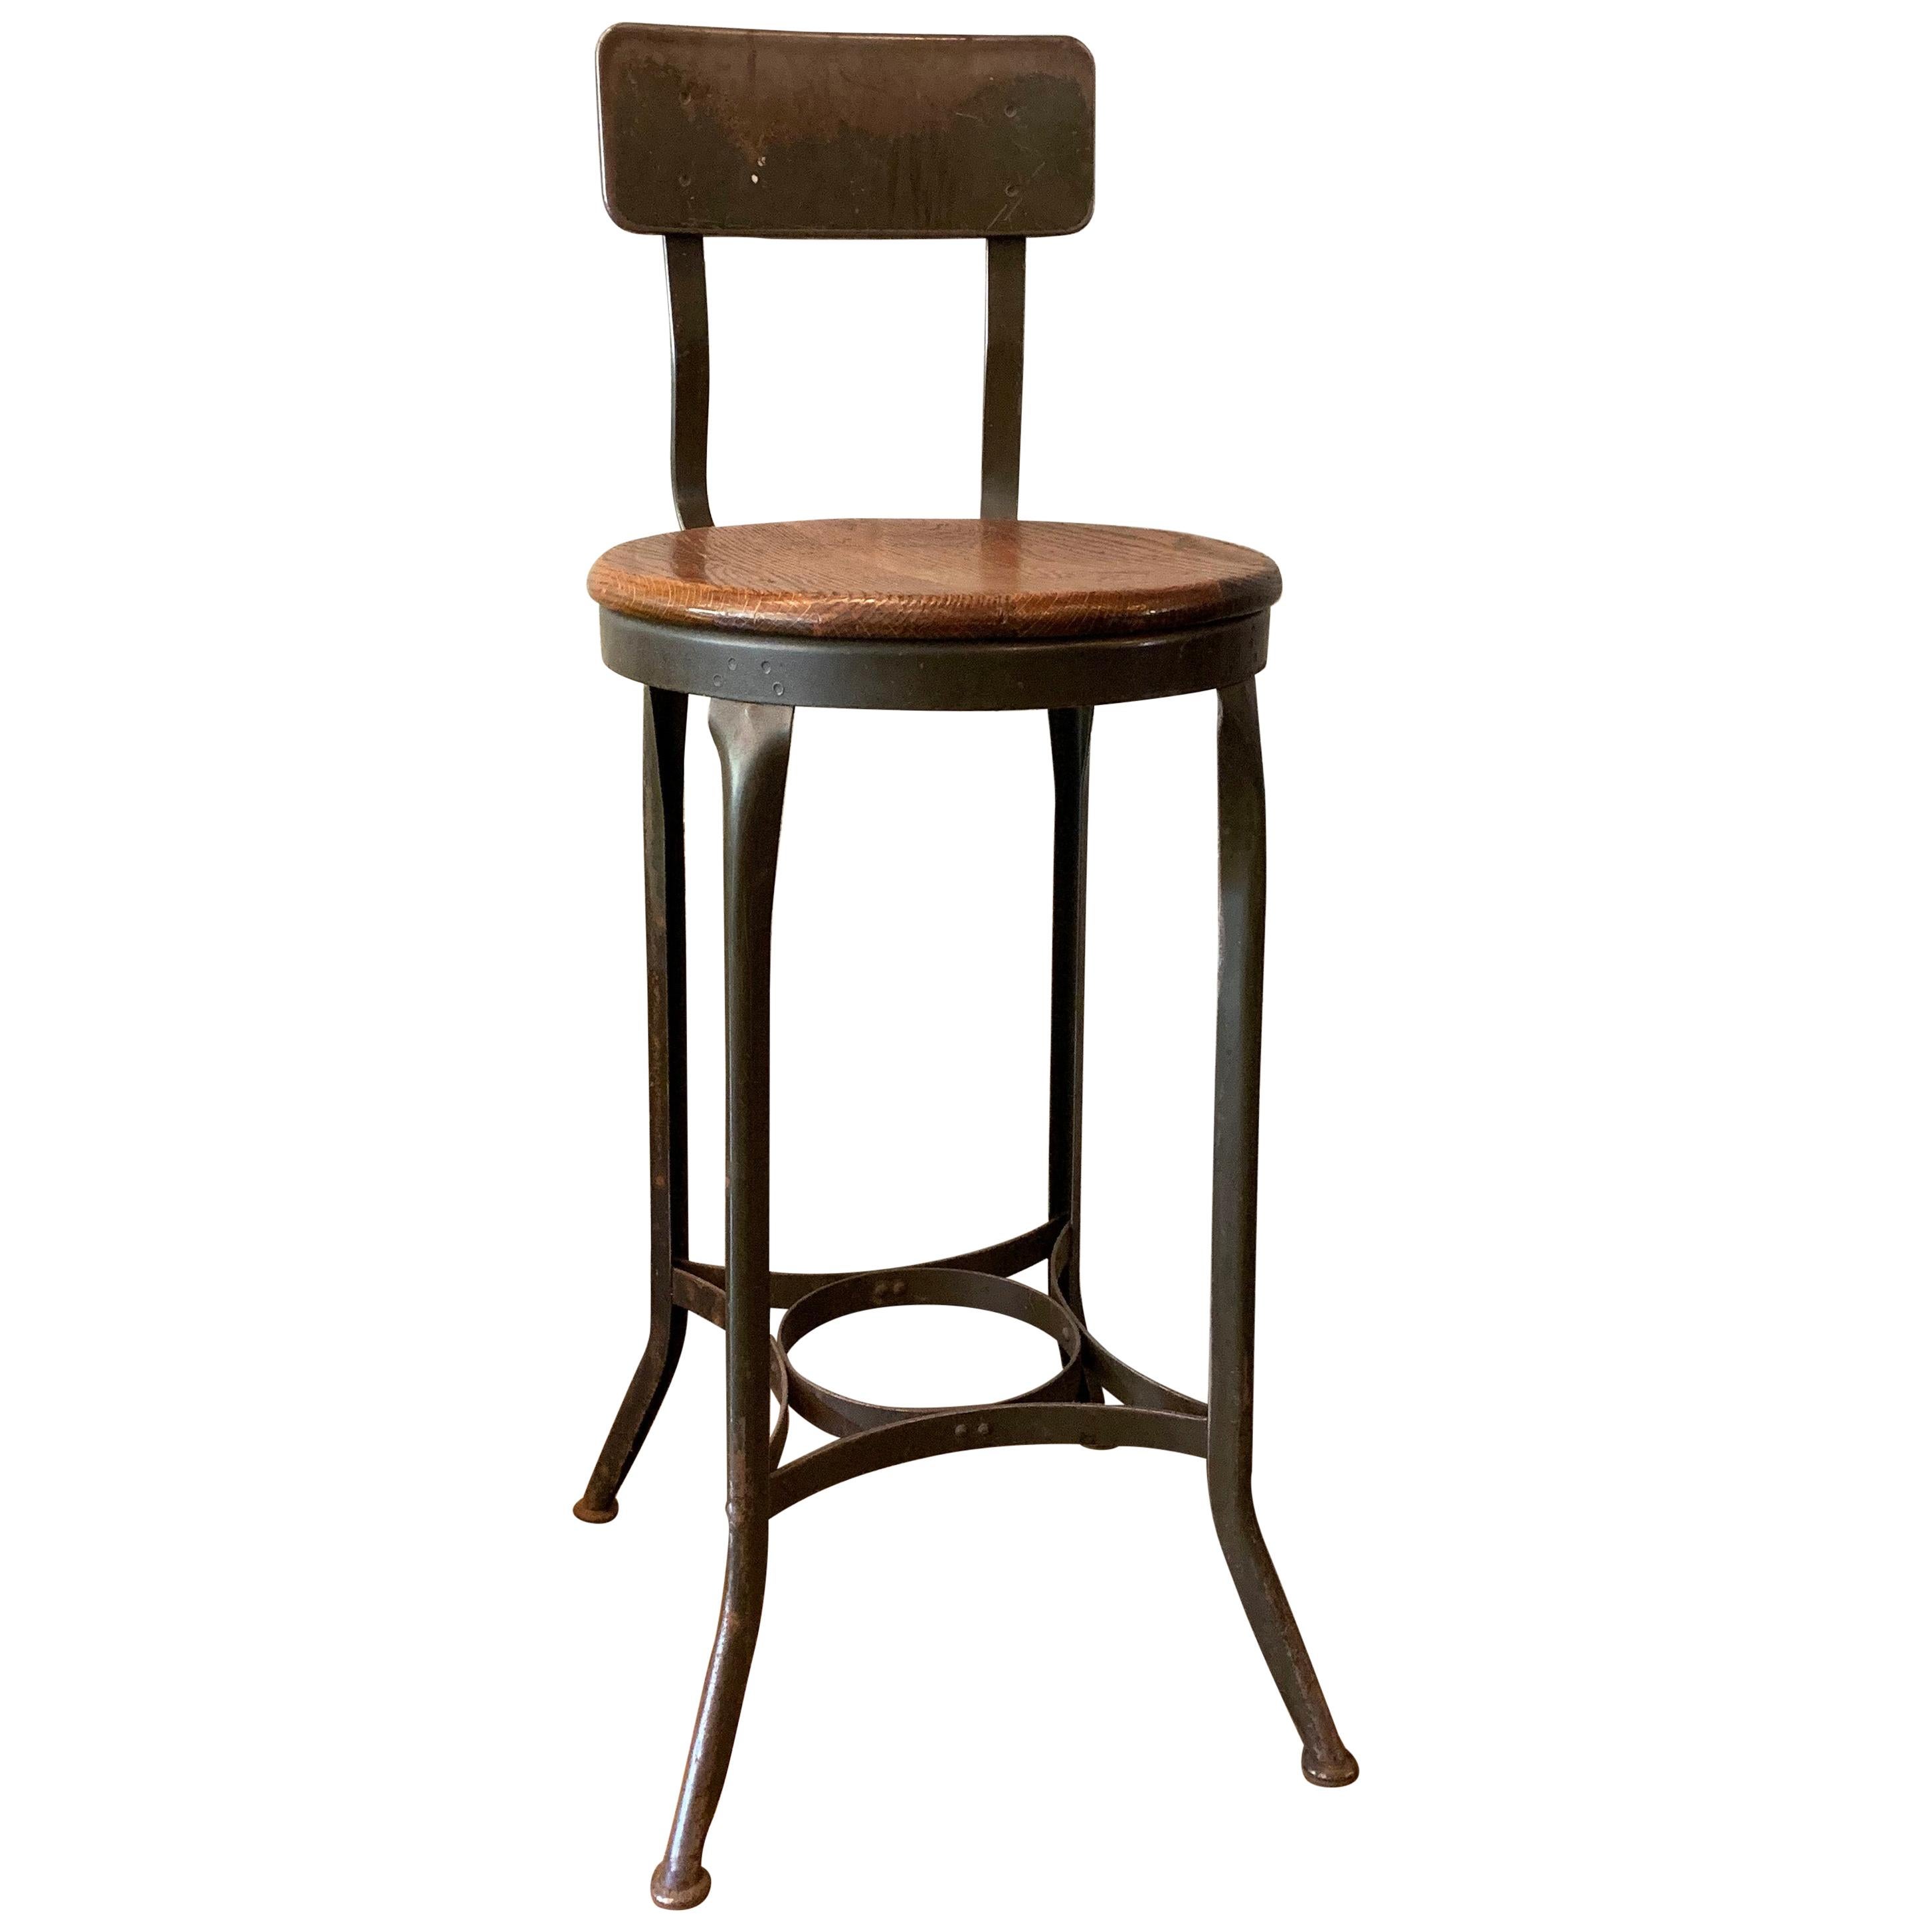 Tall Industrial Shop Stool by Toledo Metal Furniture Co.